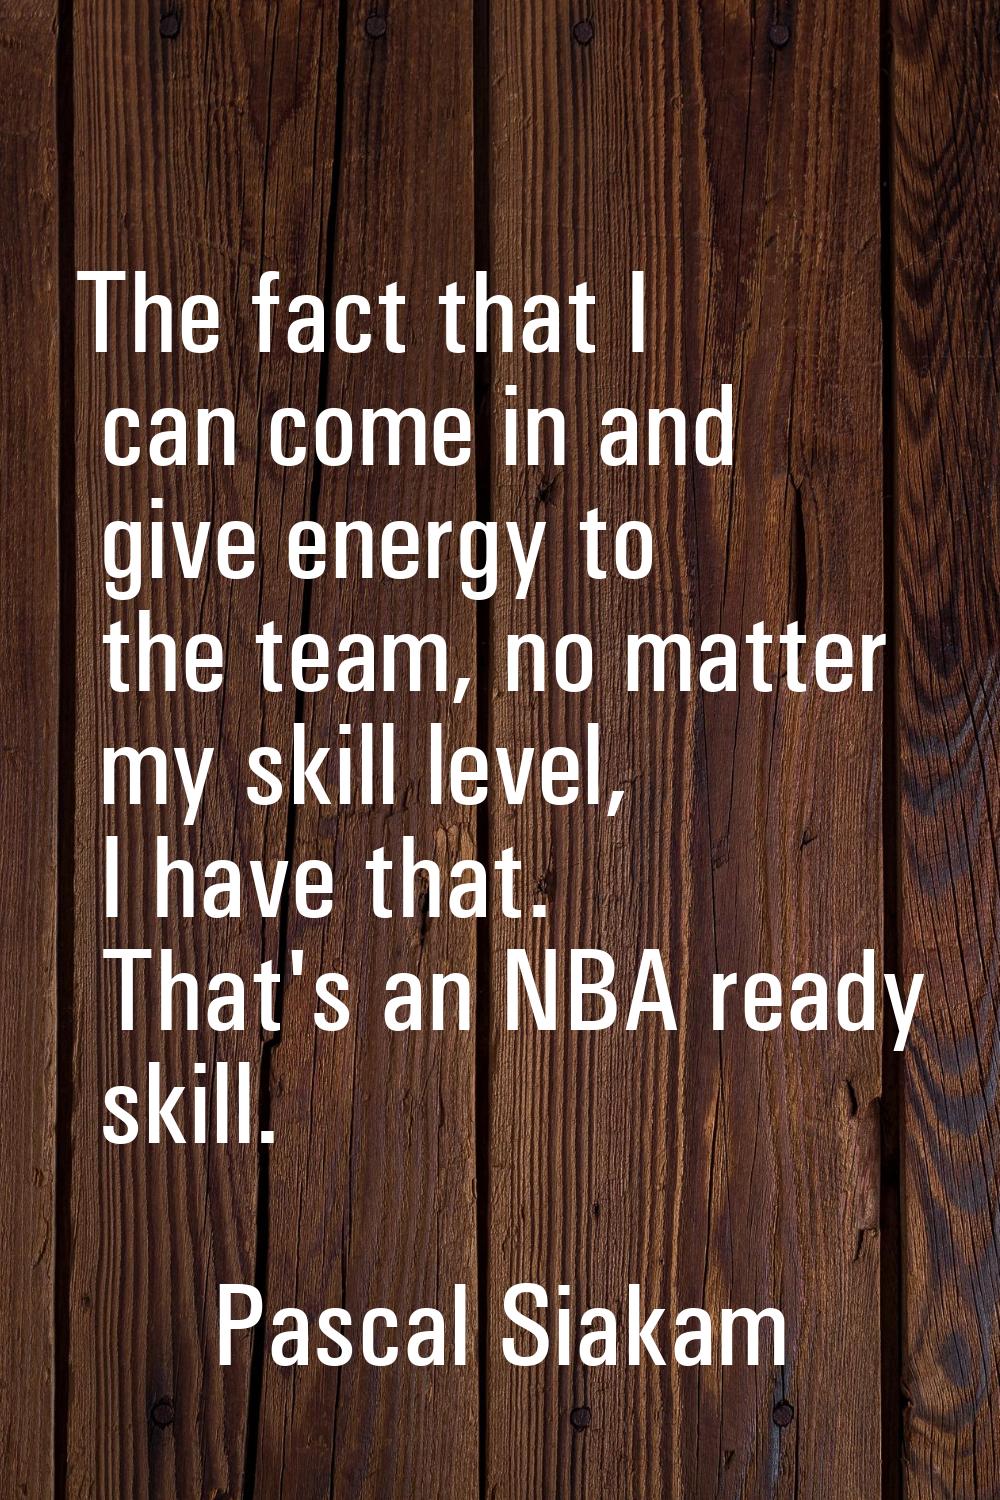 The fact that I can come in and give energy to the team, no matter my skill level, I have that. Tha